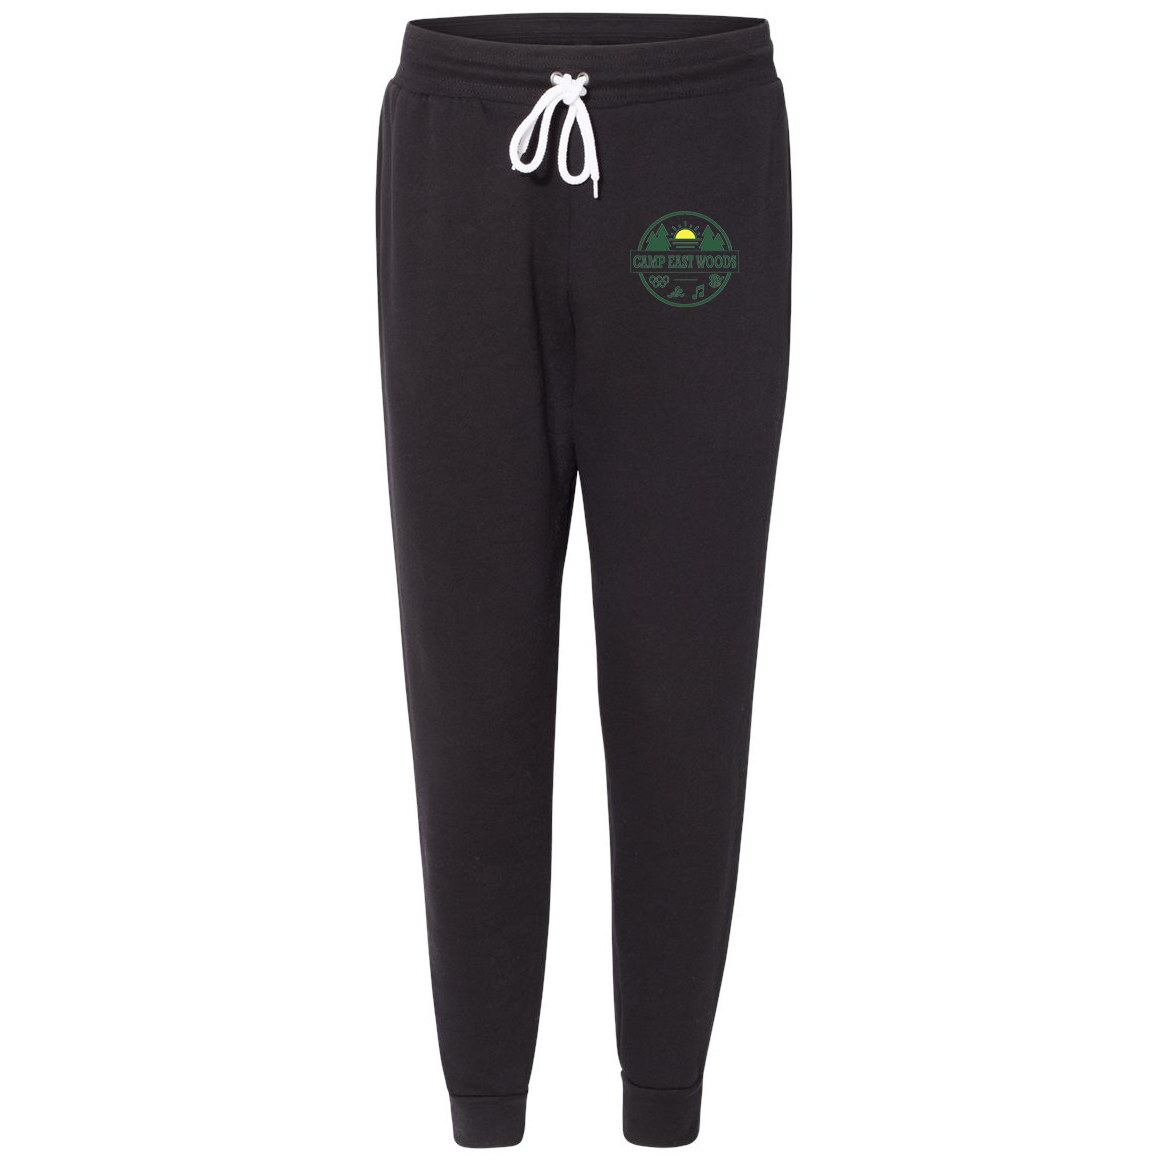 Camp East Woods Joggers